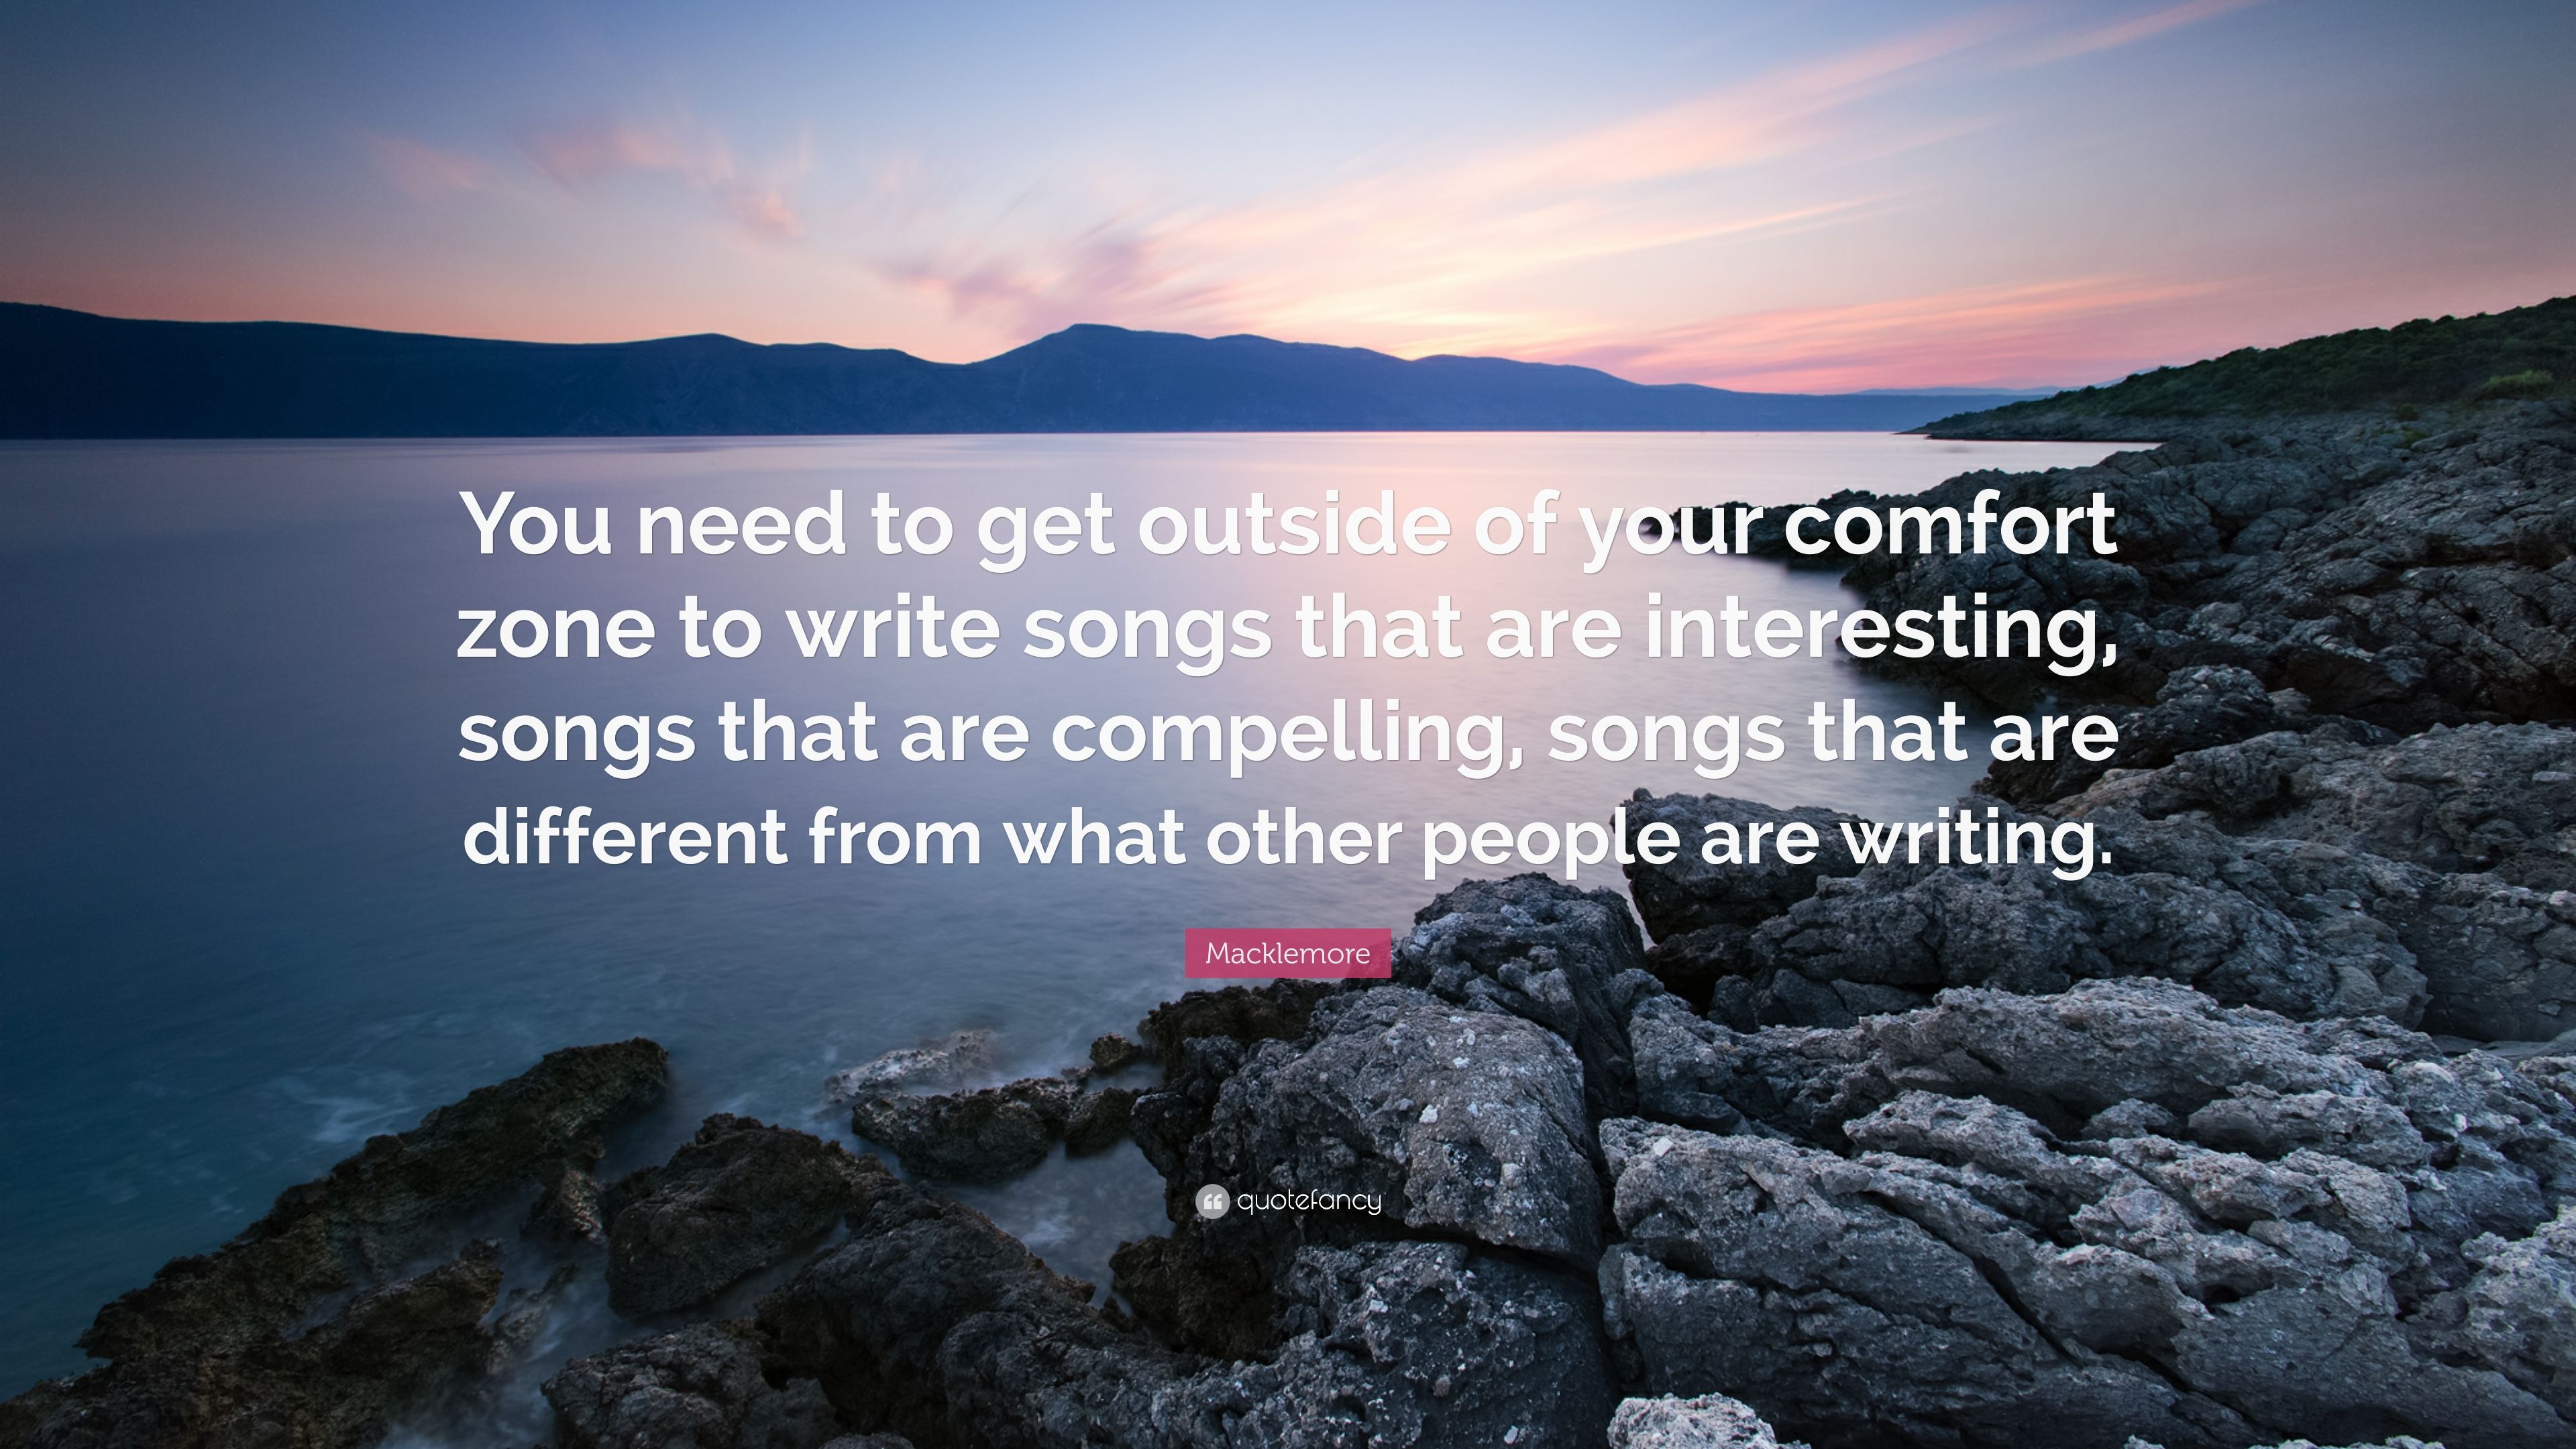 Macklemore Quote: “You need to get outside of your comfort zone to write songs that are interesting, songs that are compelling, songs that .” (7 wallpaper)